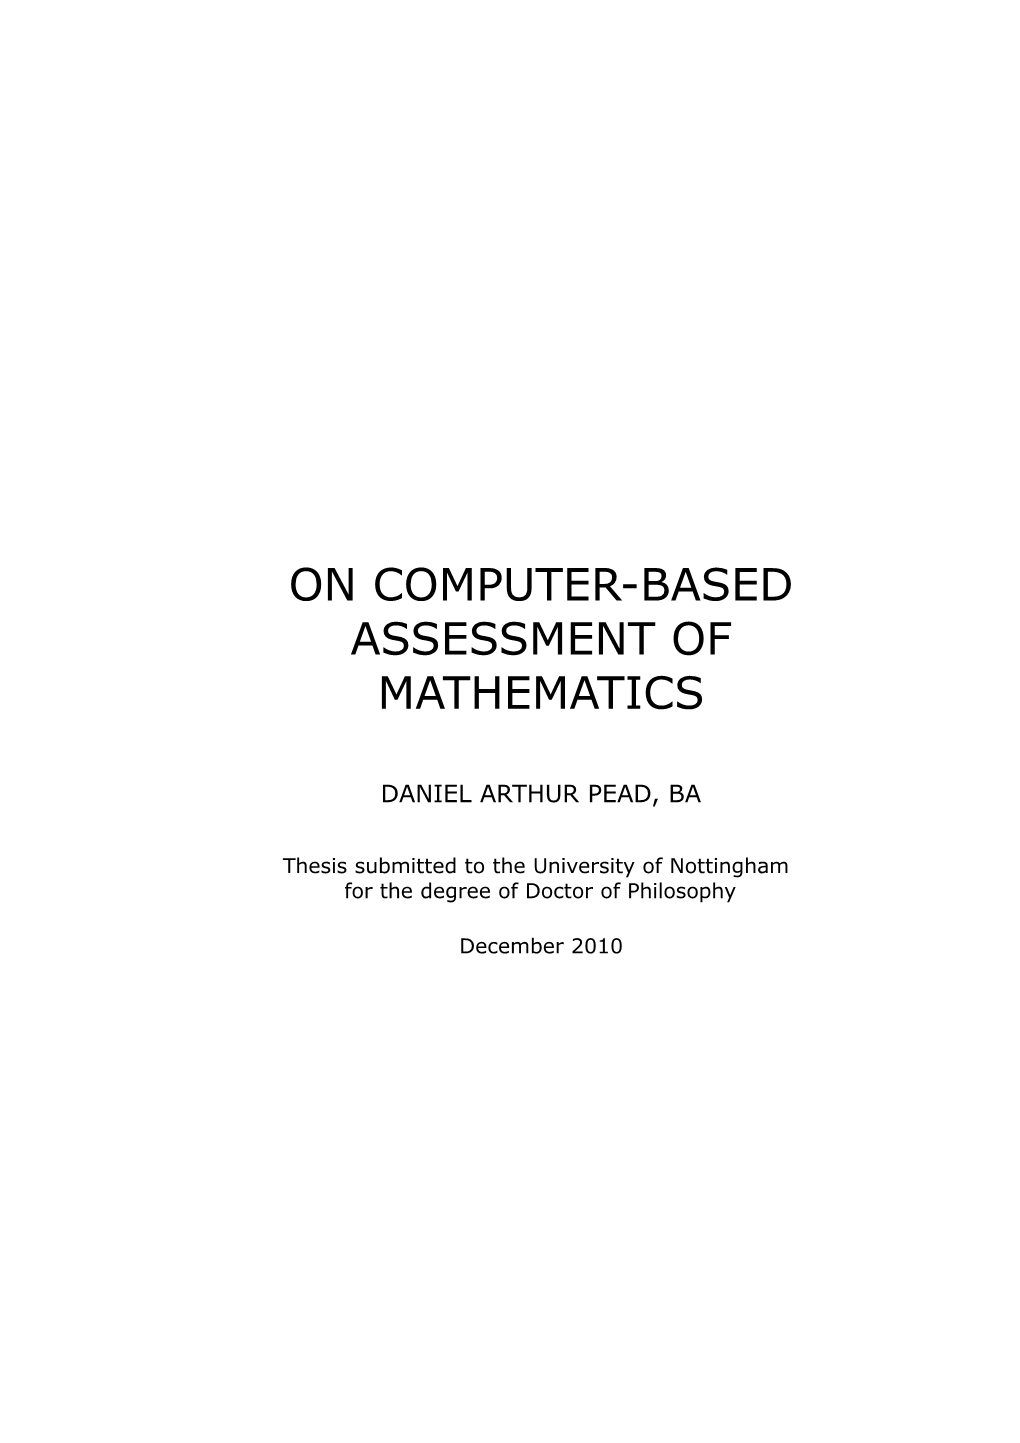 On Computer-Based Assessment of Mathematics